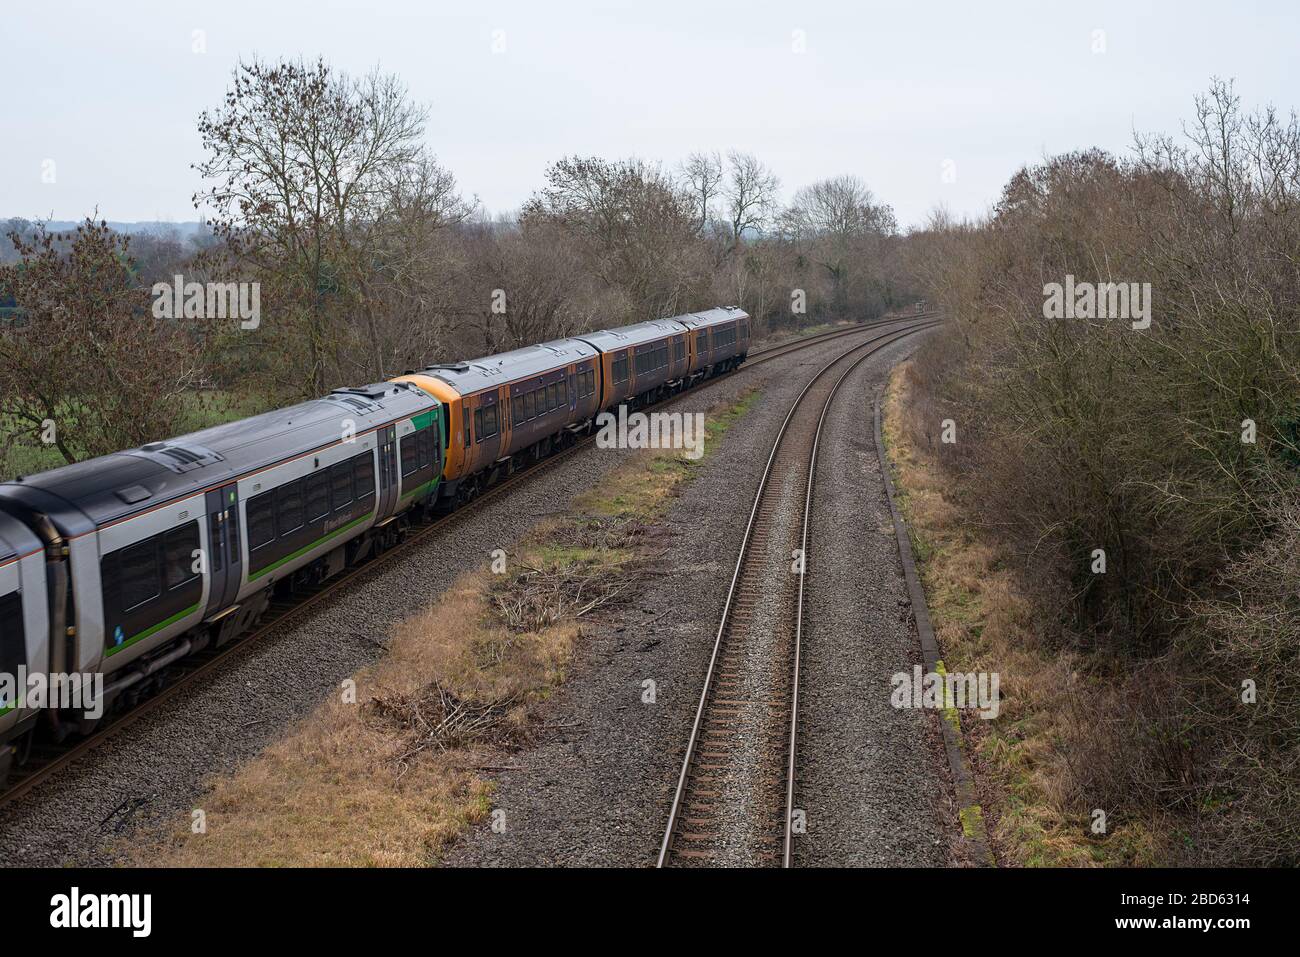 A West Midlands Railway commuter train travels towards a bend in some country side train tracks. Stock Photo